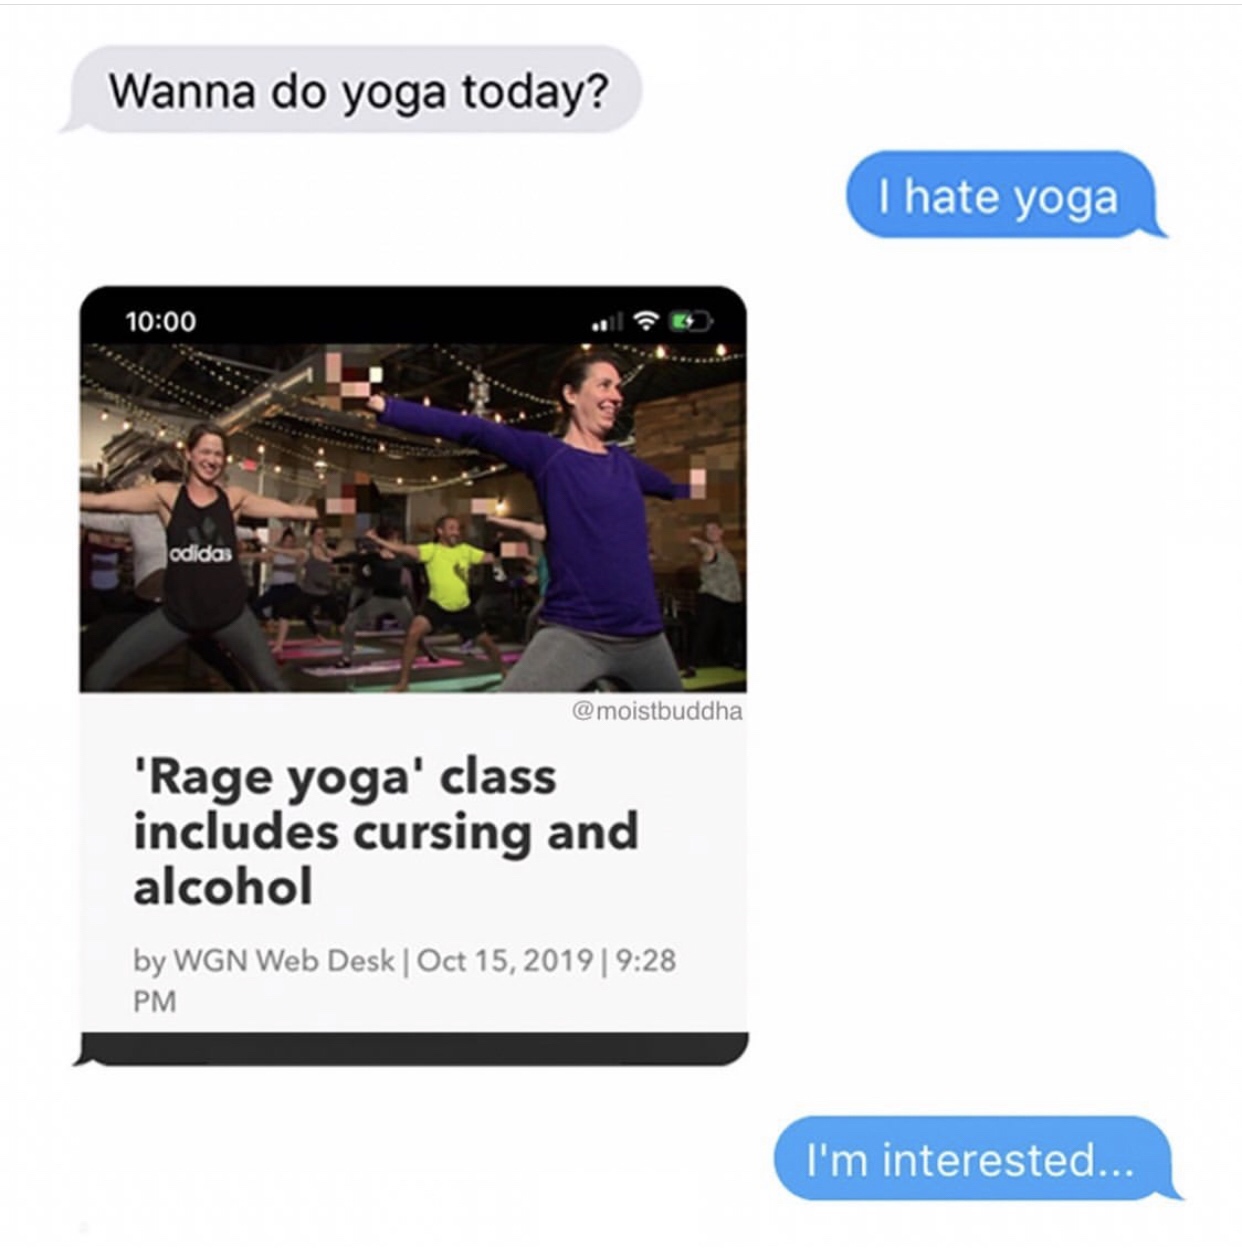 multimedia - Wanna do yoga today? I hate yoga odidas 'Rage yoga' class includes cursing and alcohol by Wgn Web Desk | I'm interested...